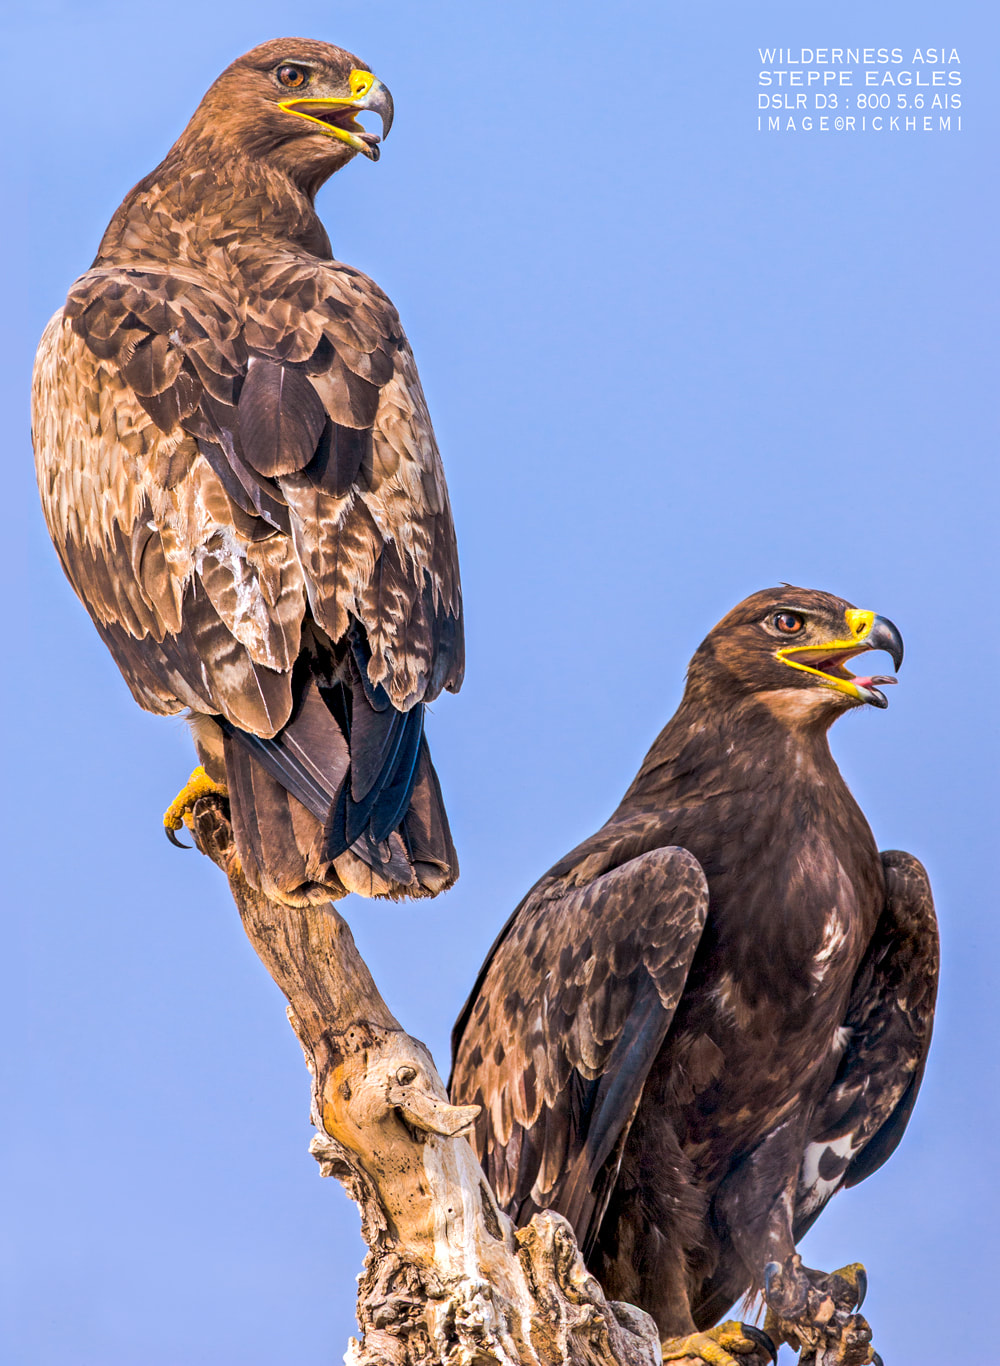 solo overland travel offshore, using classic camera gear in the 2020s, steppe eagles Nikon D3, image by Rick Hemi